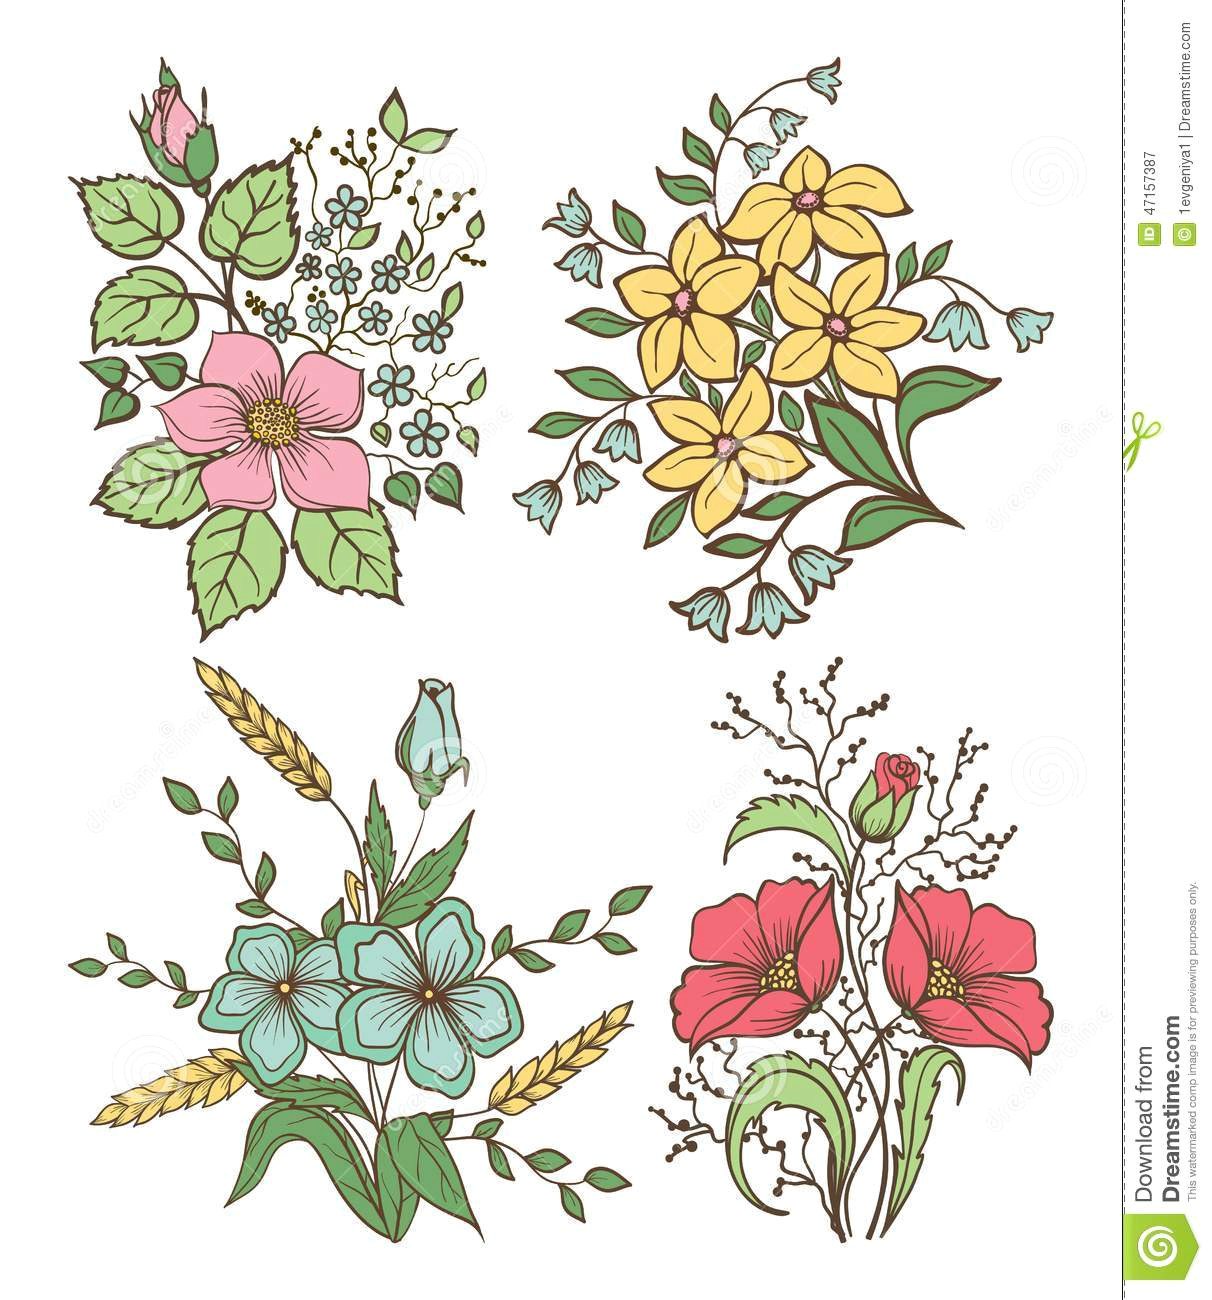 Drawing Flowers Greetings Vector Flowers Set Colorful Floral Collection with Leaves and